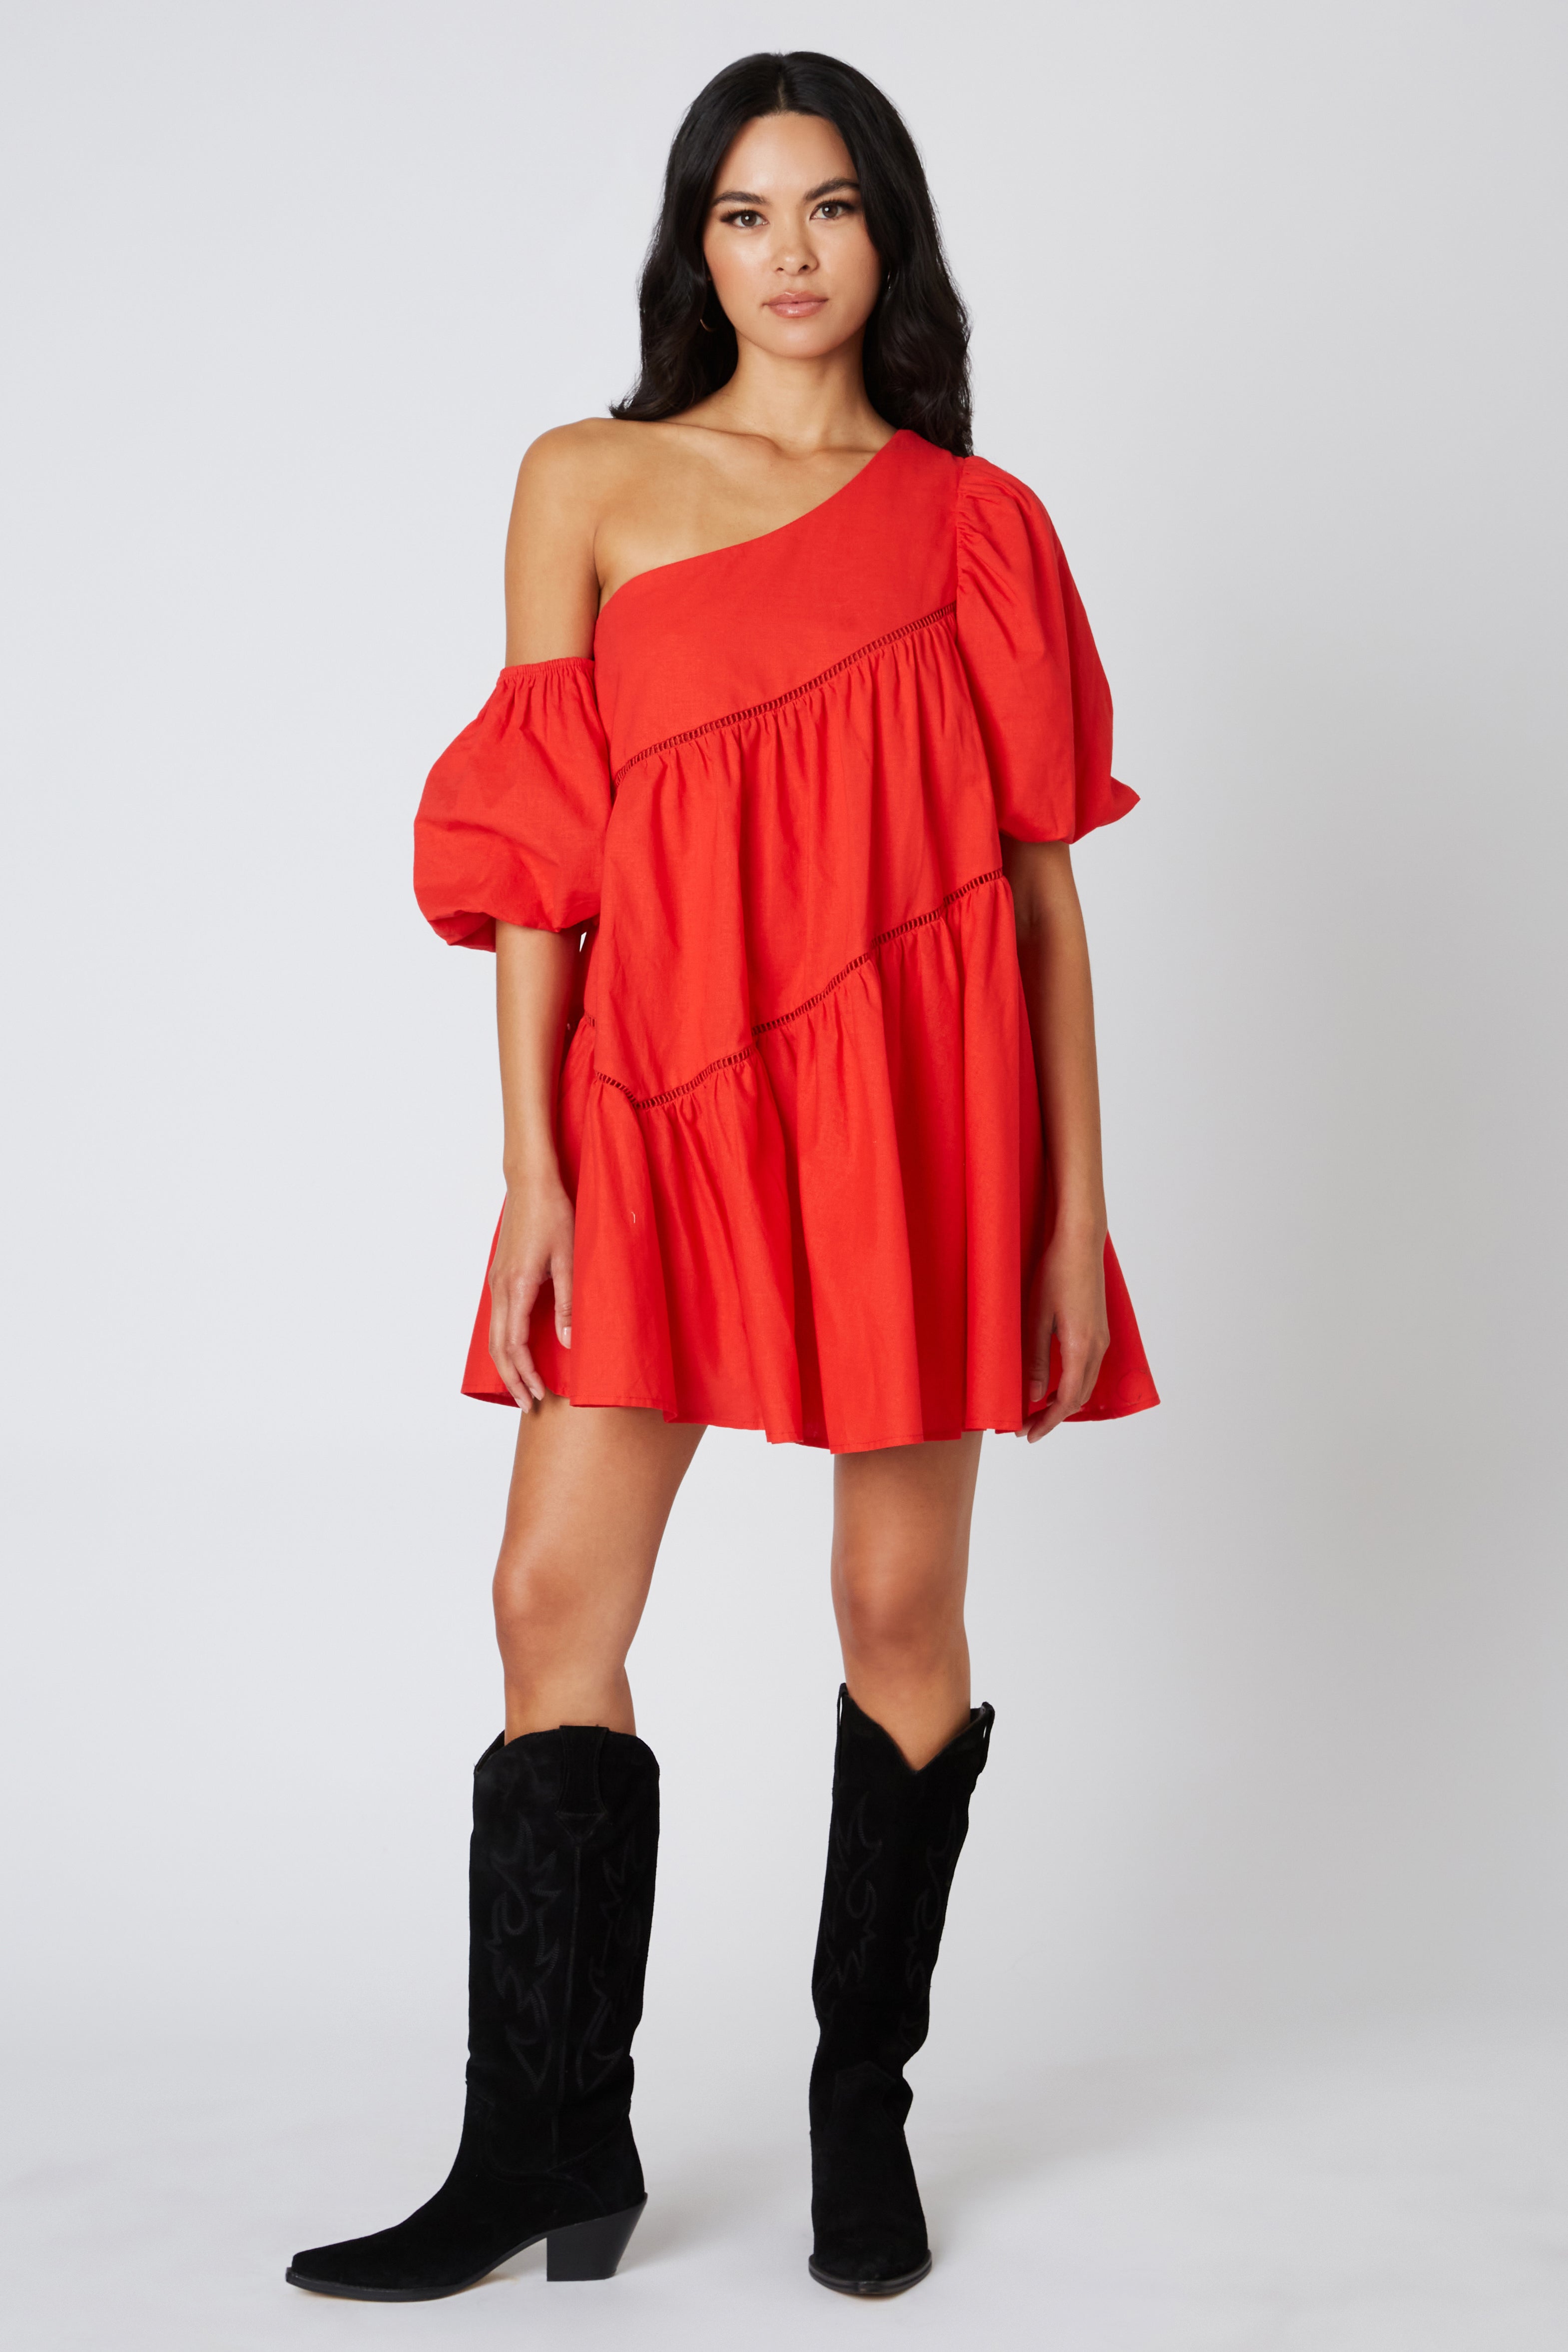 Cold Shoulder Trapeze Dress in Red Front View